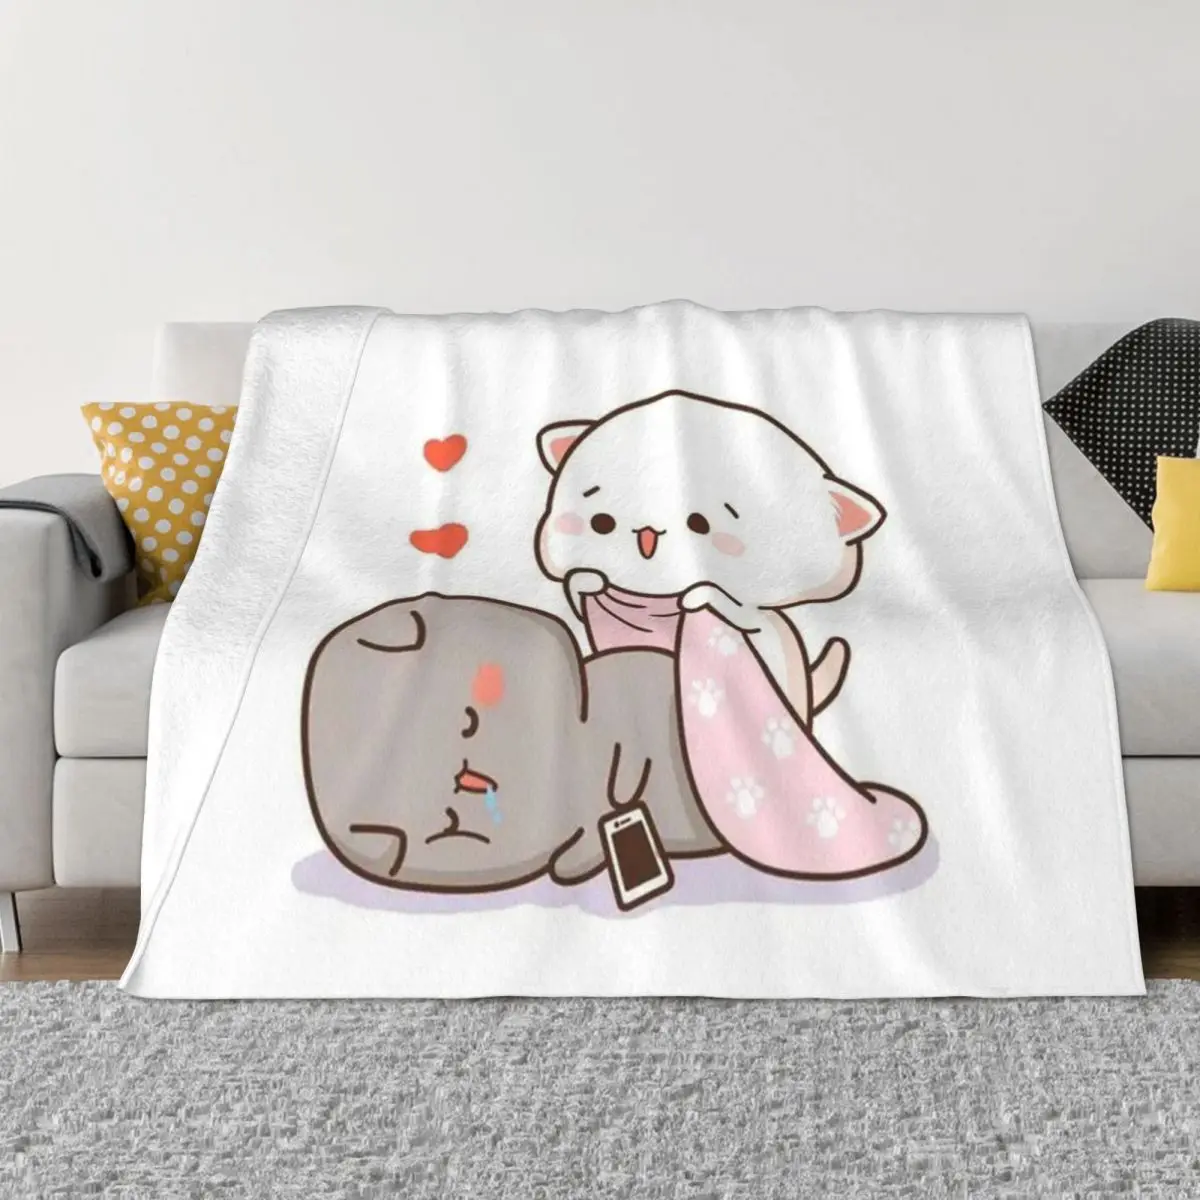 

Peach And Goma Mochi Friendes Love Each Other Blankets Coral Fleece Plush Decoration Bedroom Bedding Couch Bedspread